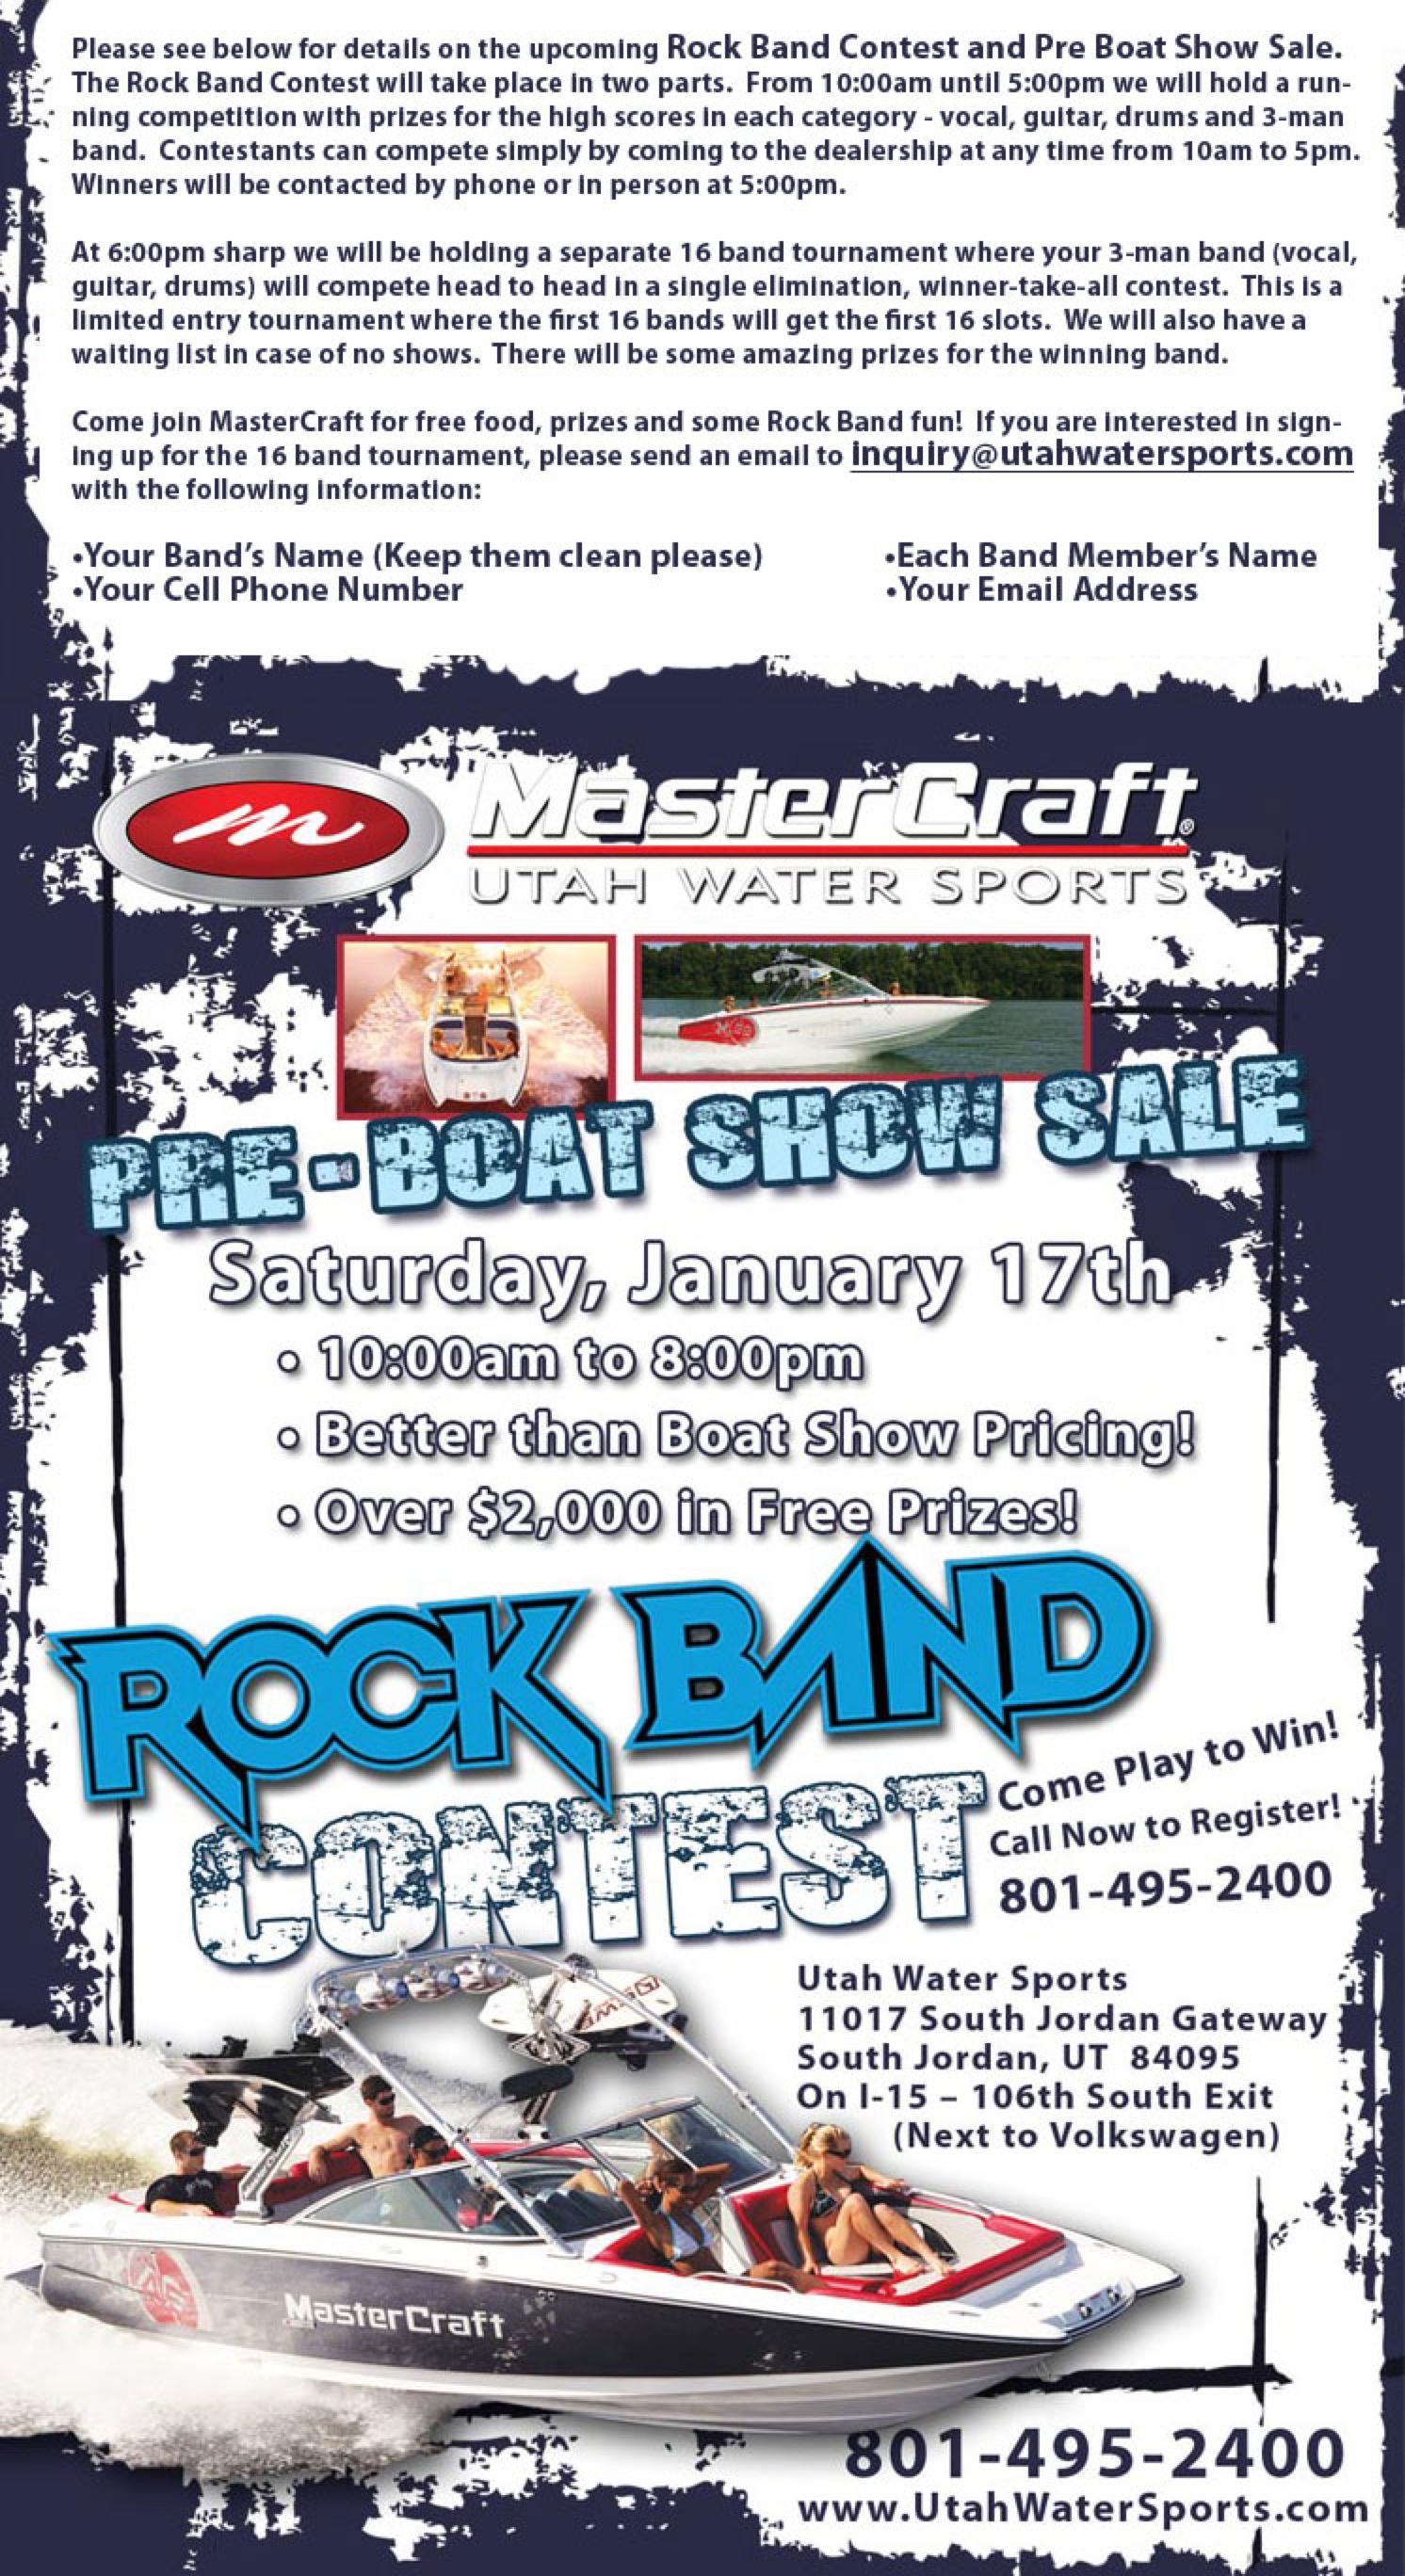 Utah Water Sports Rock Band Contest